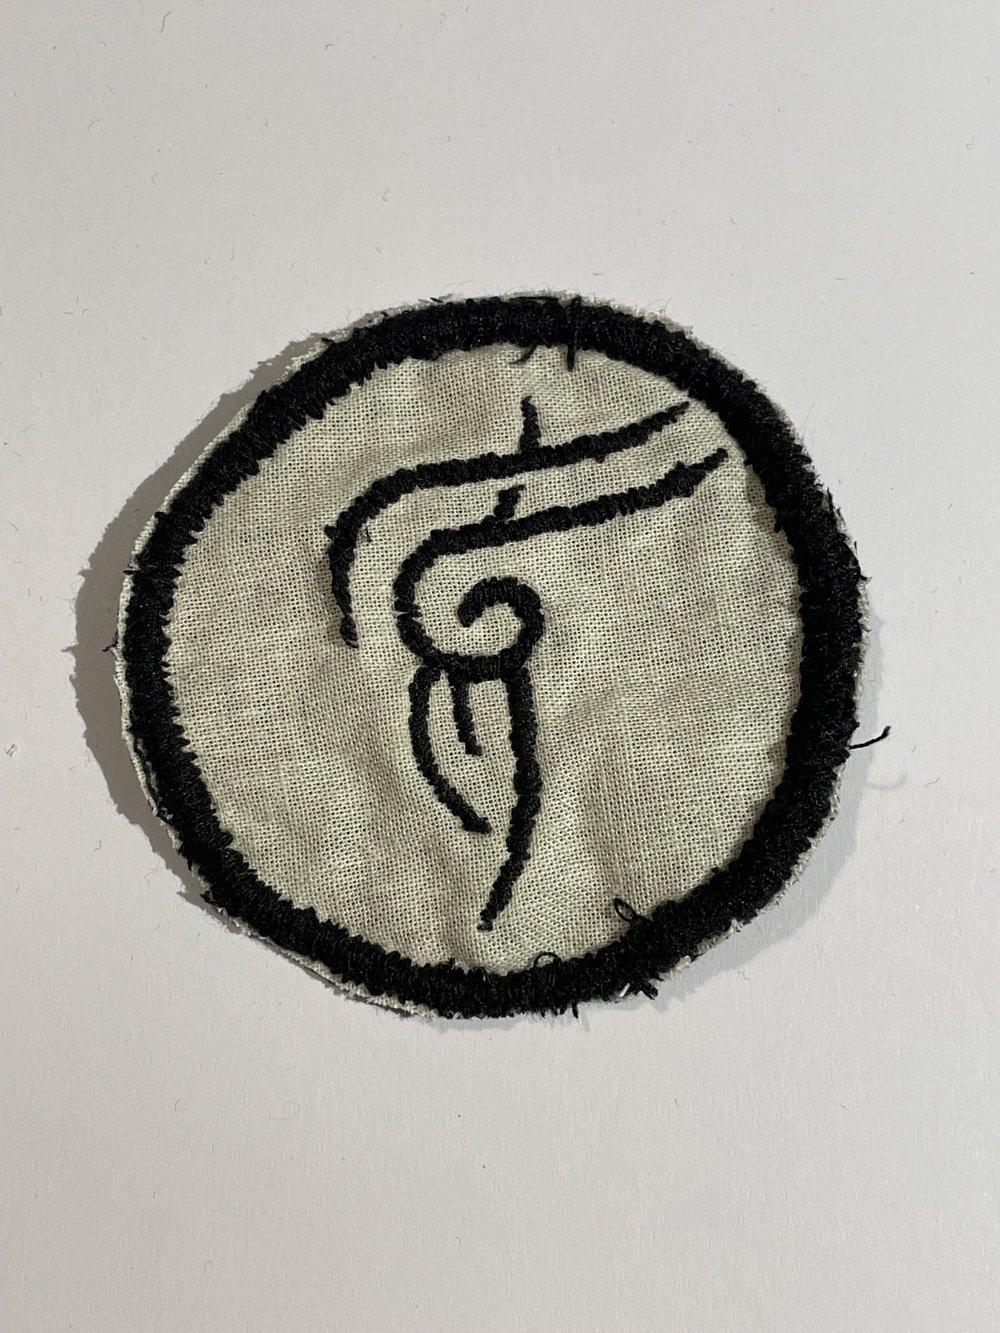 Image of Tribal patch.